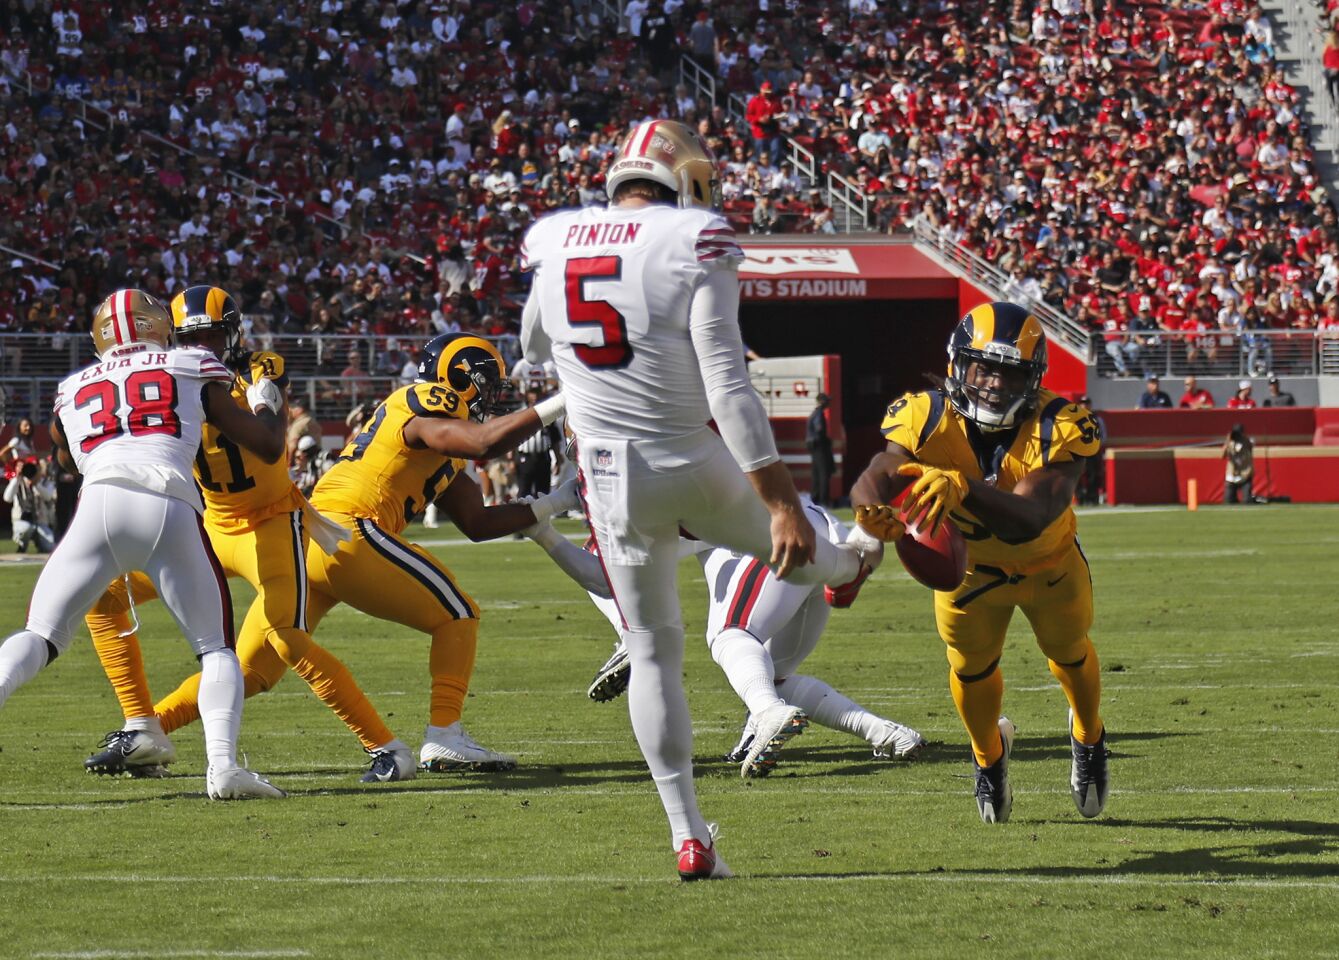 Rams linebacker Cory Littleton (58) blocks a punt by San Francisco 49ers punter Bradley Pinion (5) which led to a safety in the first half at Levi's Stadium on Sunday in Santa Clara.